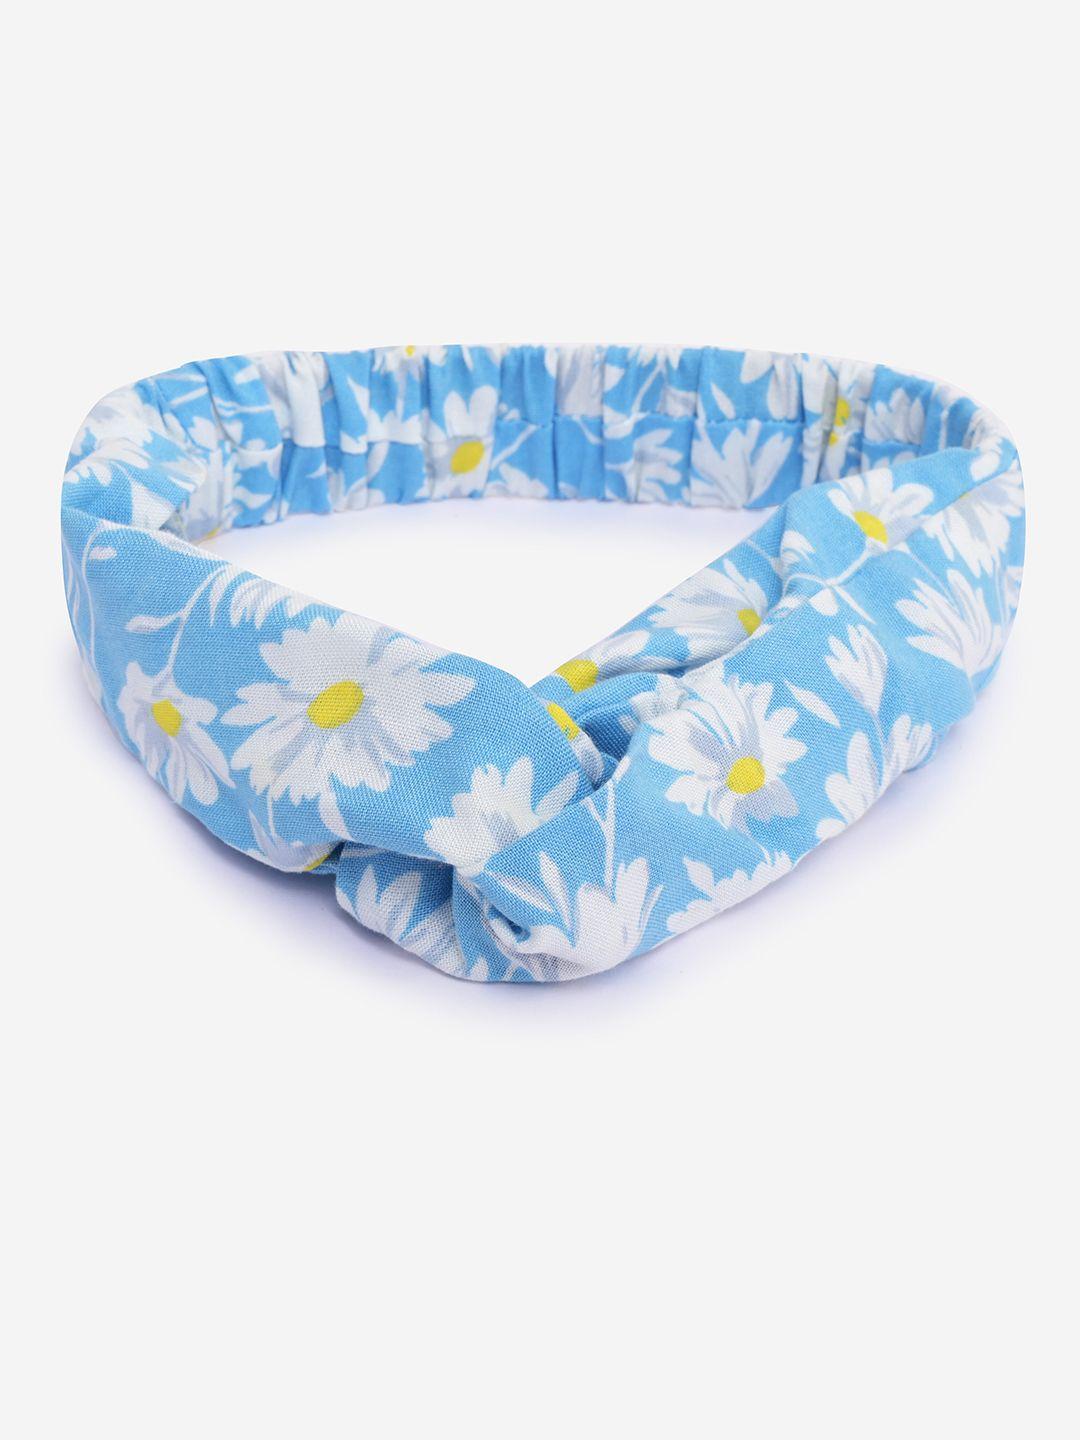 buckleup girls turquoise blue & white floral printed hairband